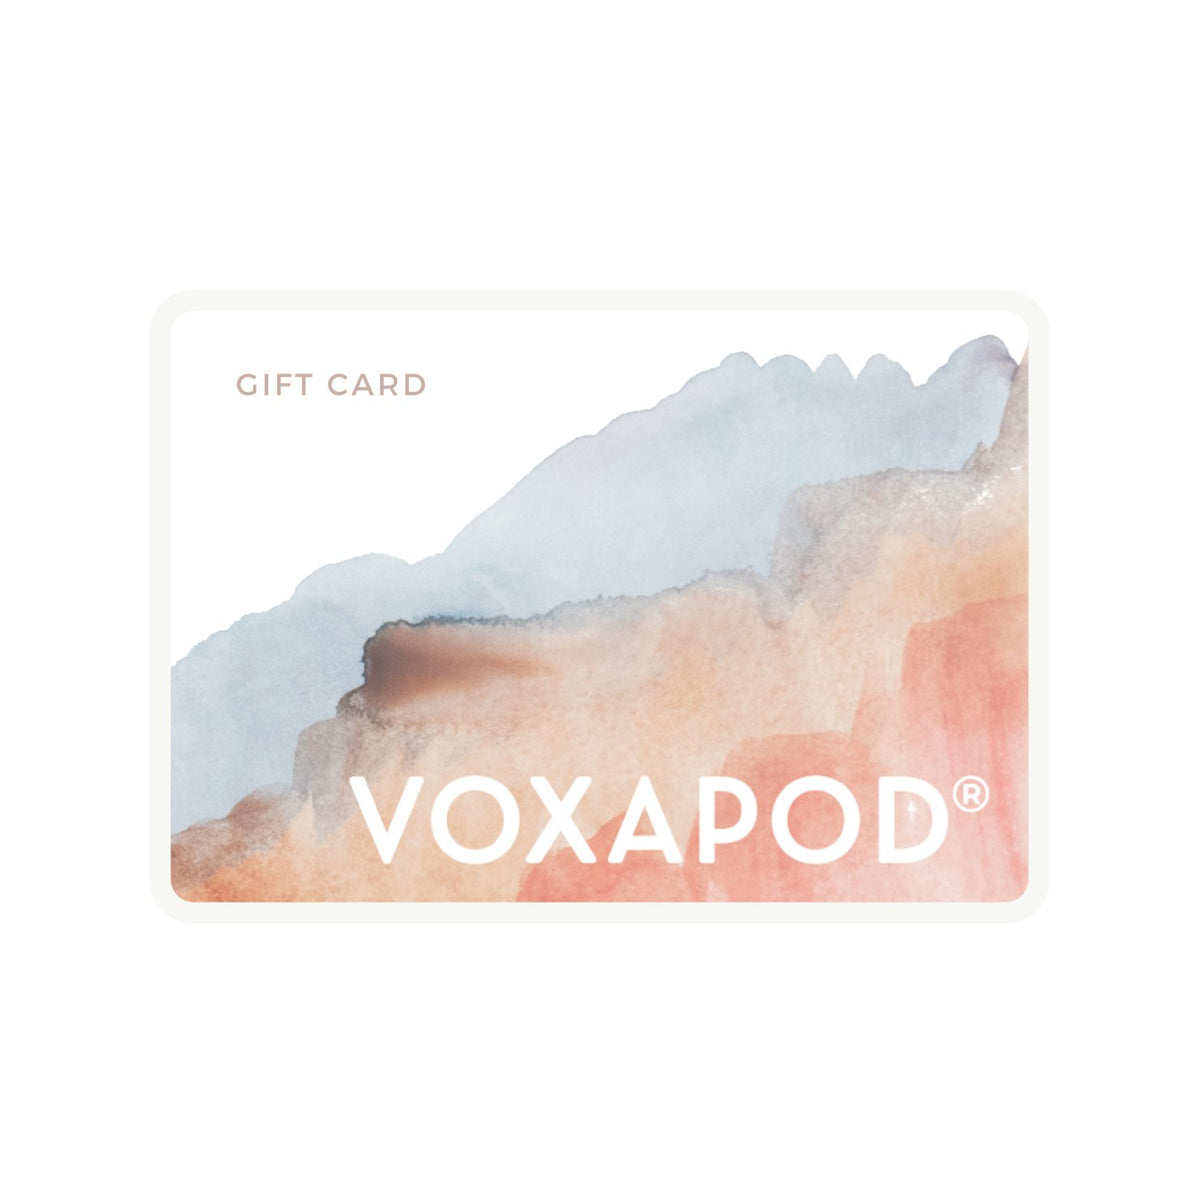 VOXAPOD® Gift Card - VOXAPOD® soft reusable medical grade silicone fda approved period cup